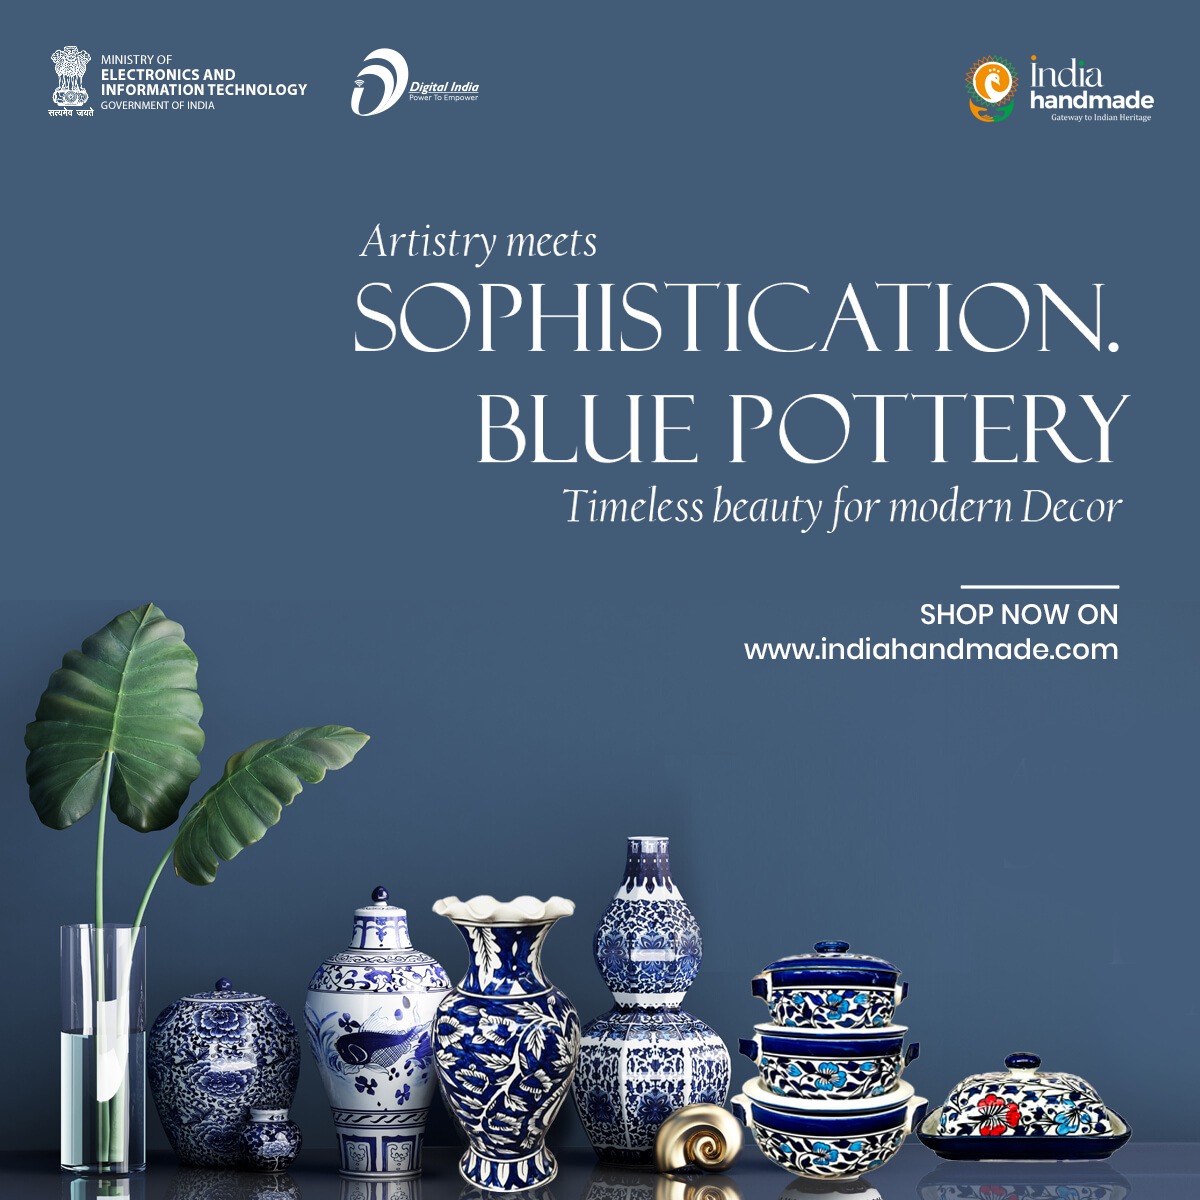 🔷 A traditional craft of Jaipur, Blue Pottery got its name because of the eye-catching cobalt blue dye used to colour the pottery. Buy authentic blue pottery at indiahandmade.com #DigitalIndia @Indiahandmade_ @PIBJaipur